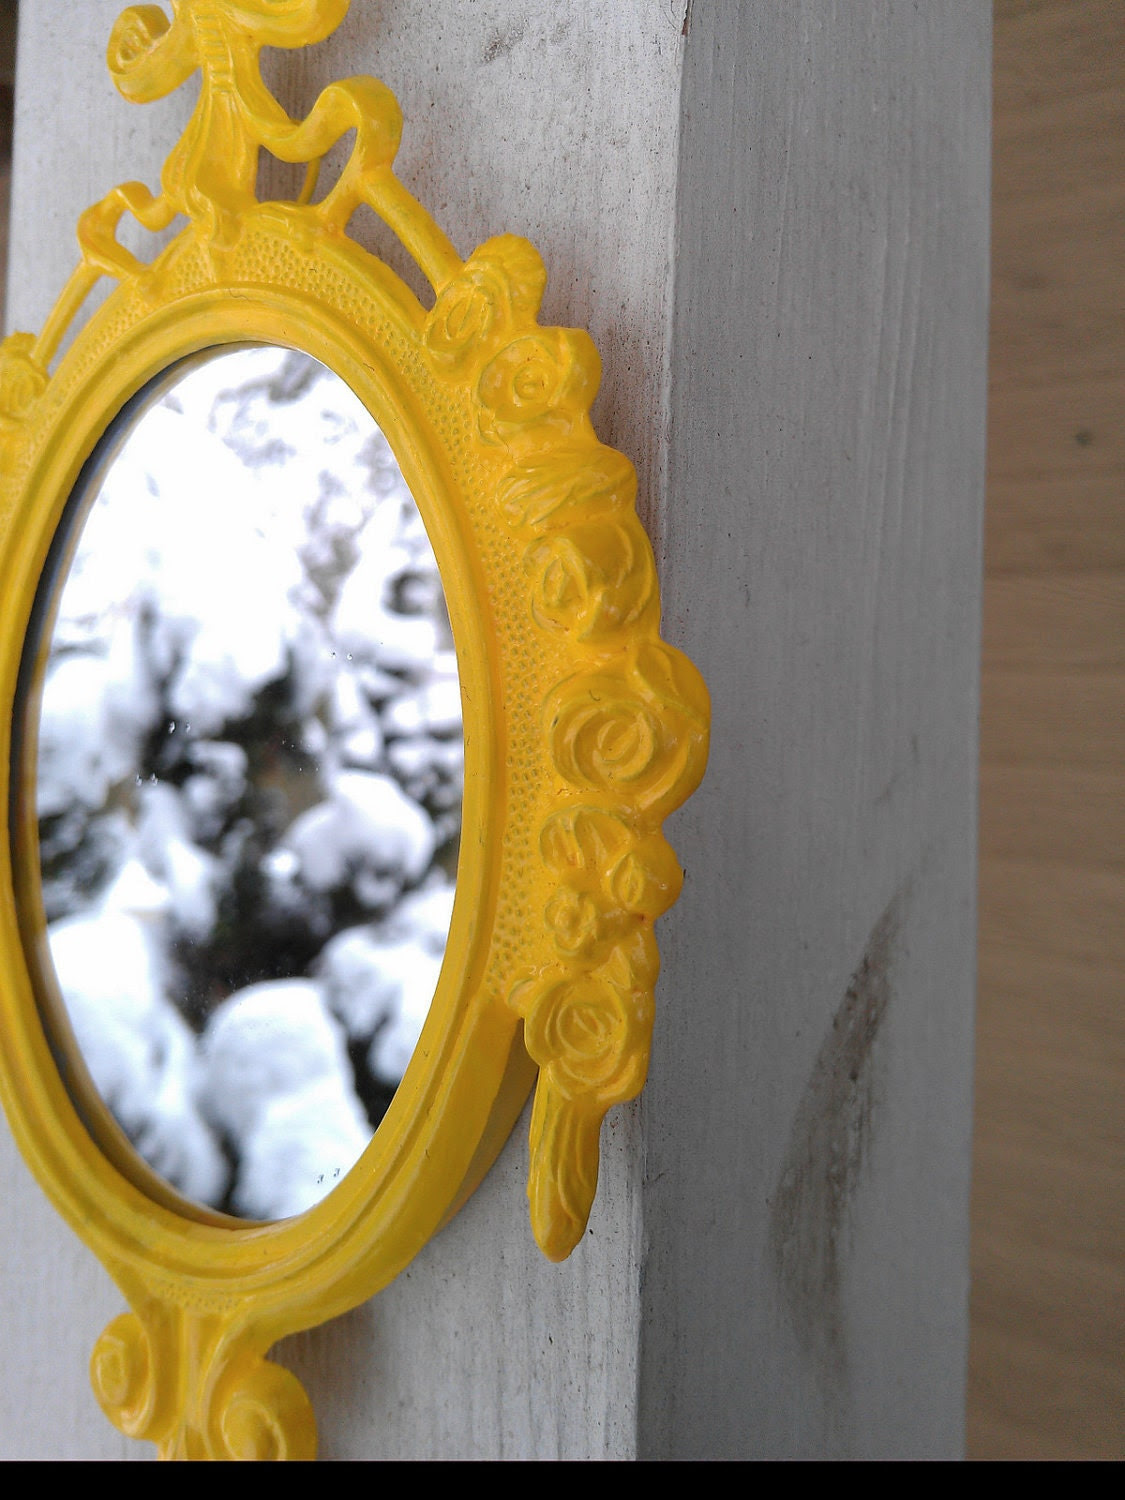 Small Mirror in Vintage Lemon Yellow Frame - Revived Vintage